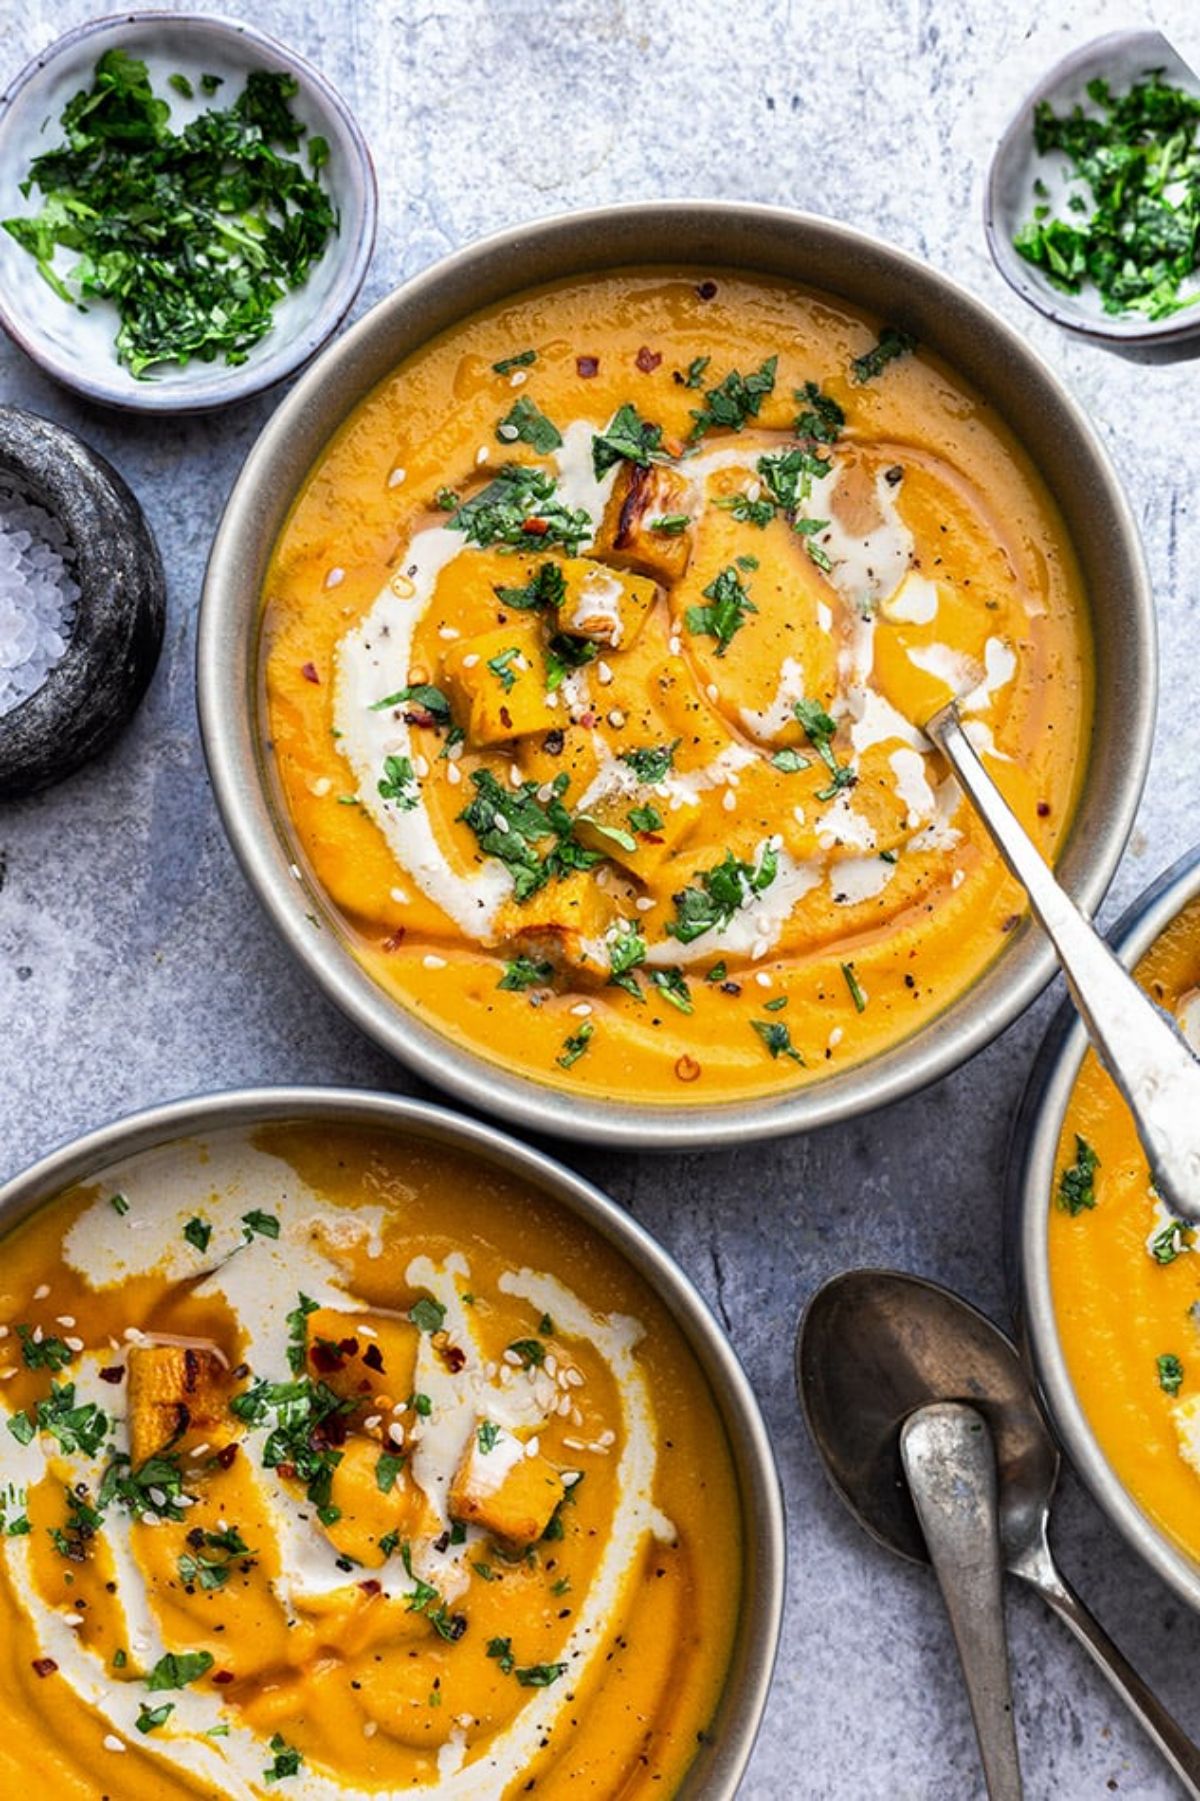 2 dishes filled with pumpkin soup, topped with scattered herbs and drizzled with cream